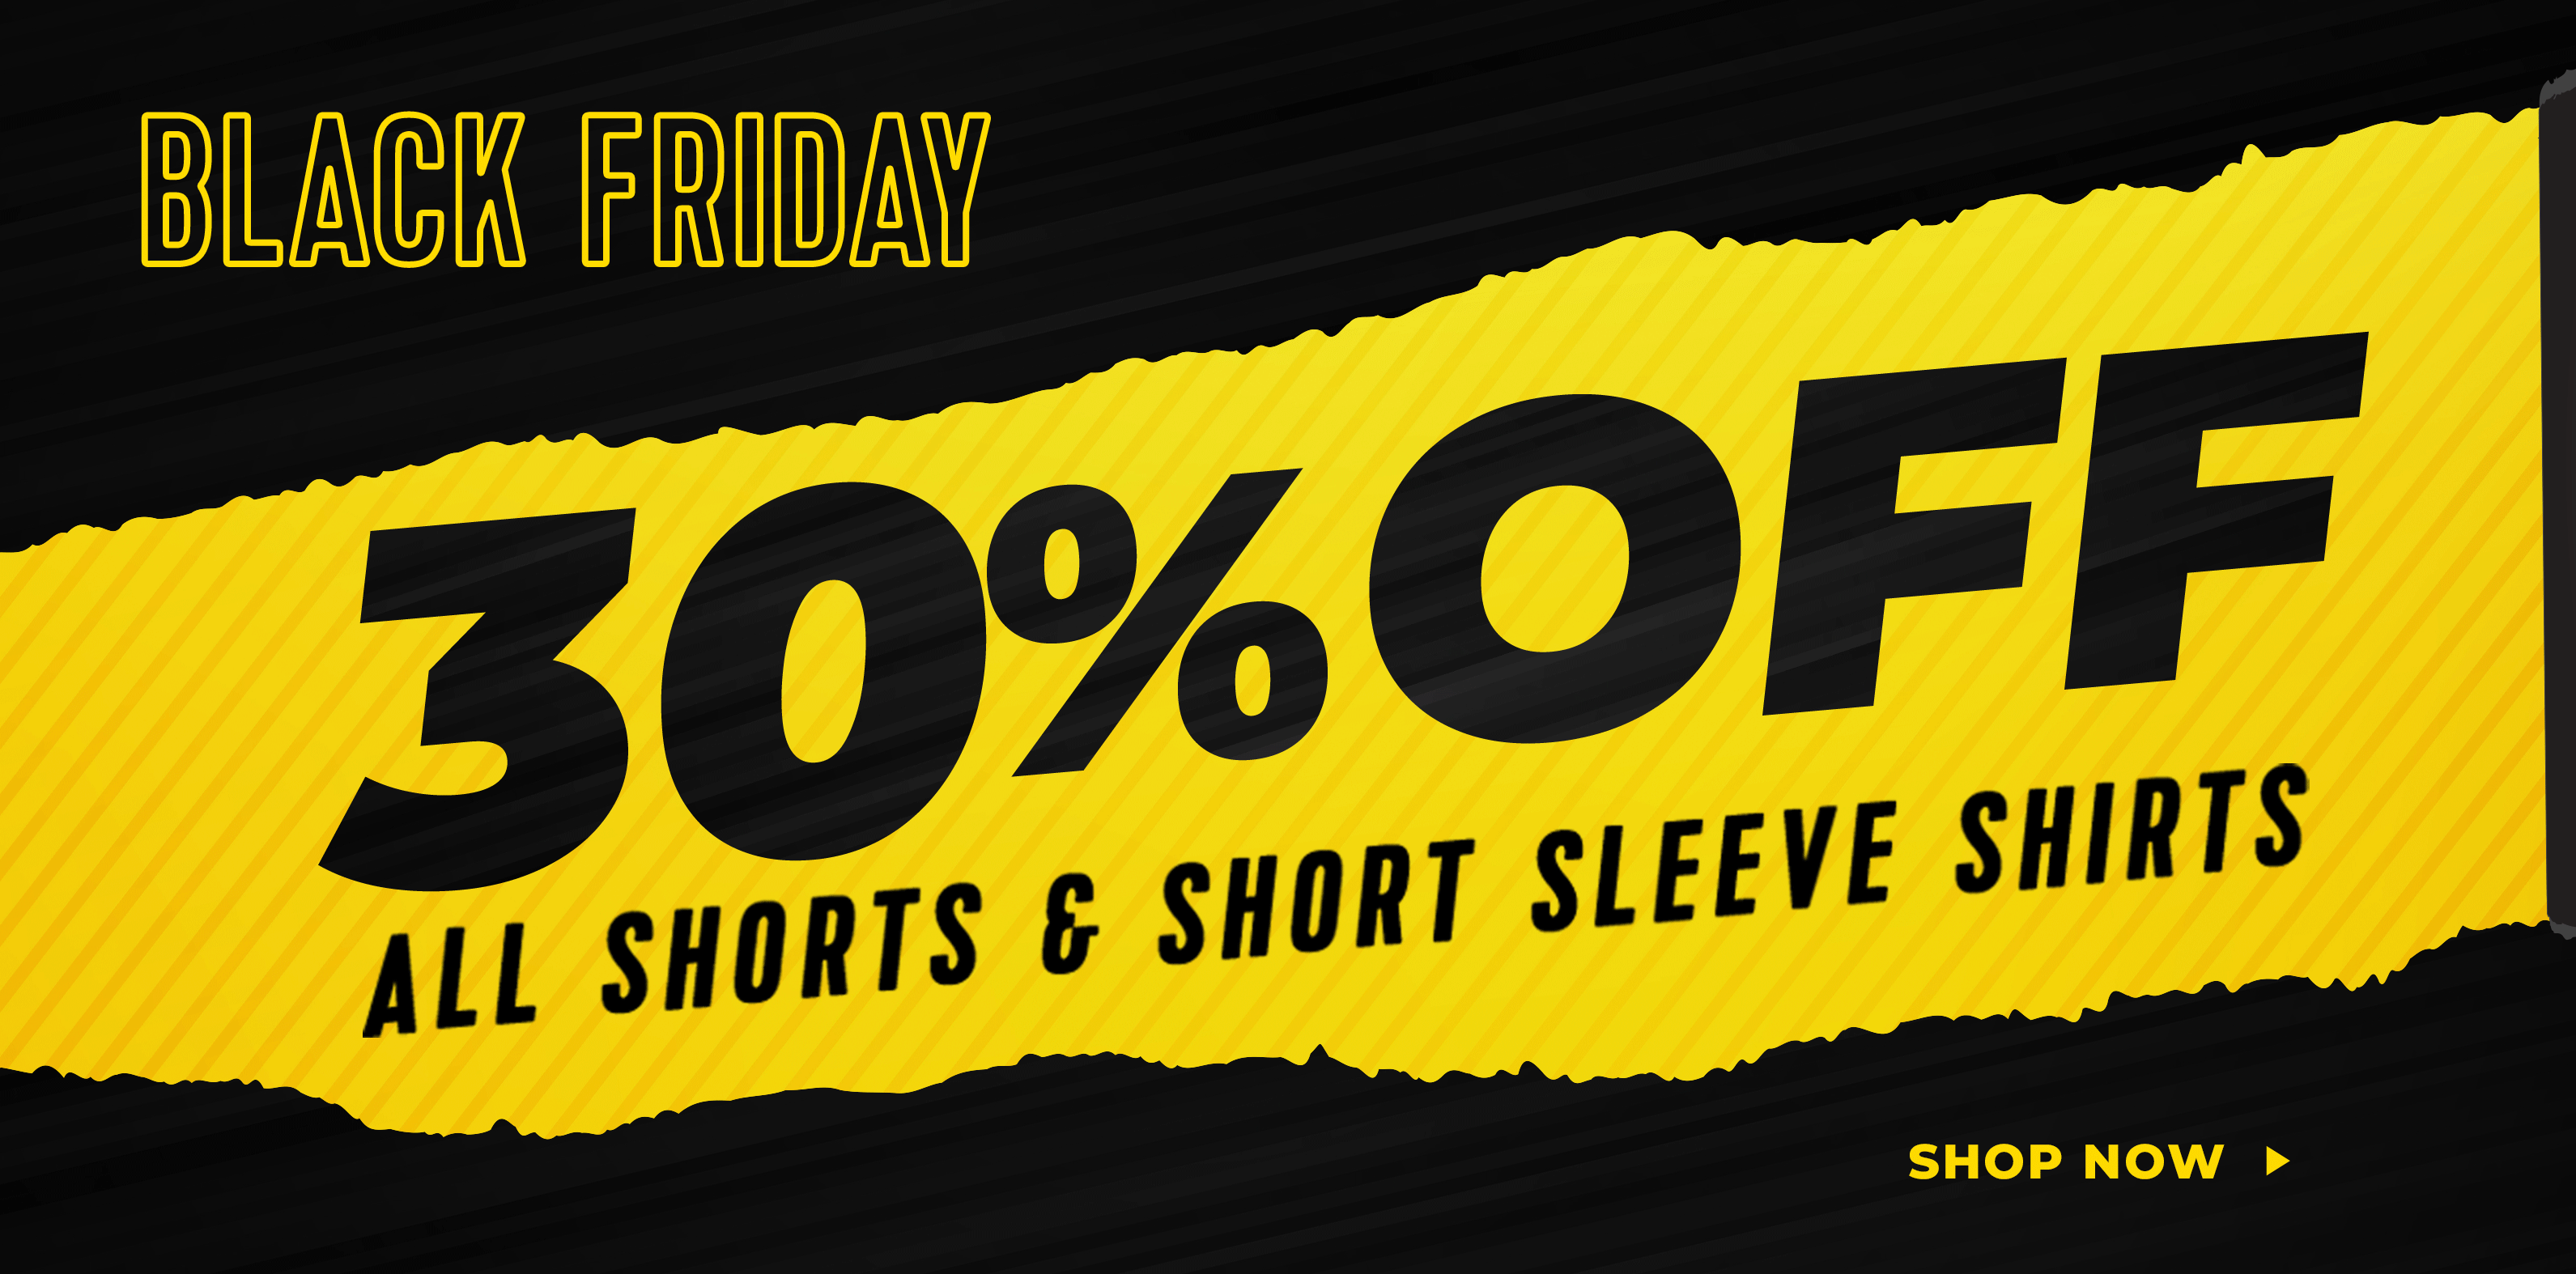 Connor Cyber week: 30% OFF shorts & short sleeve shirts, Free shipping $80+